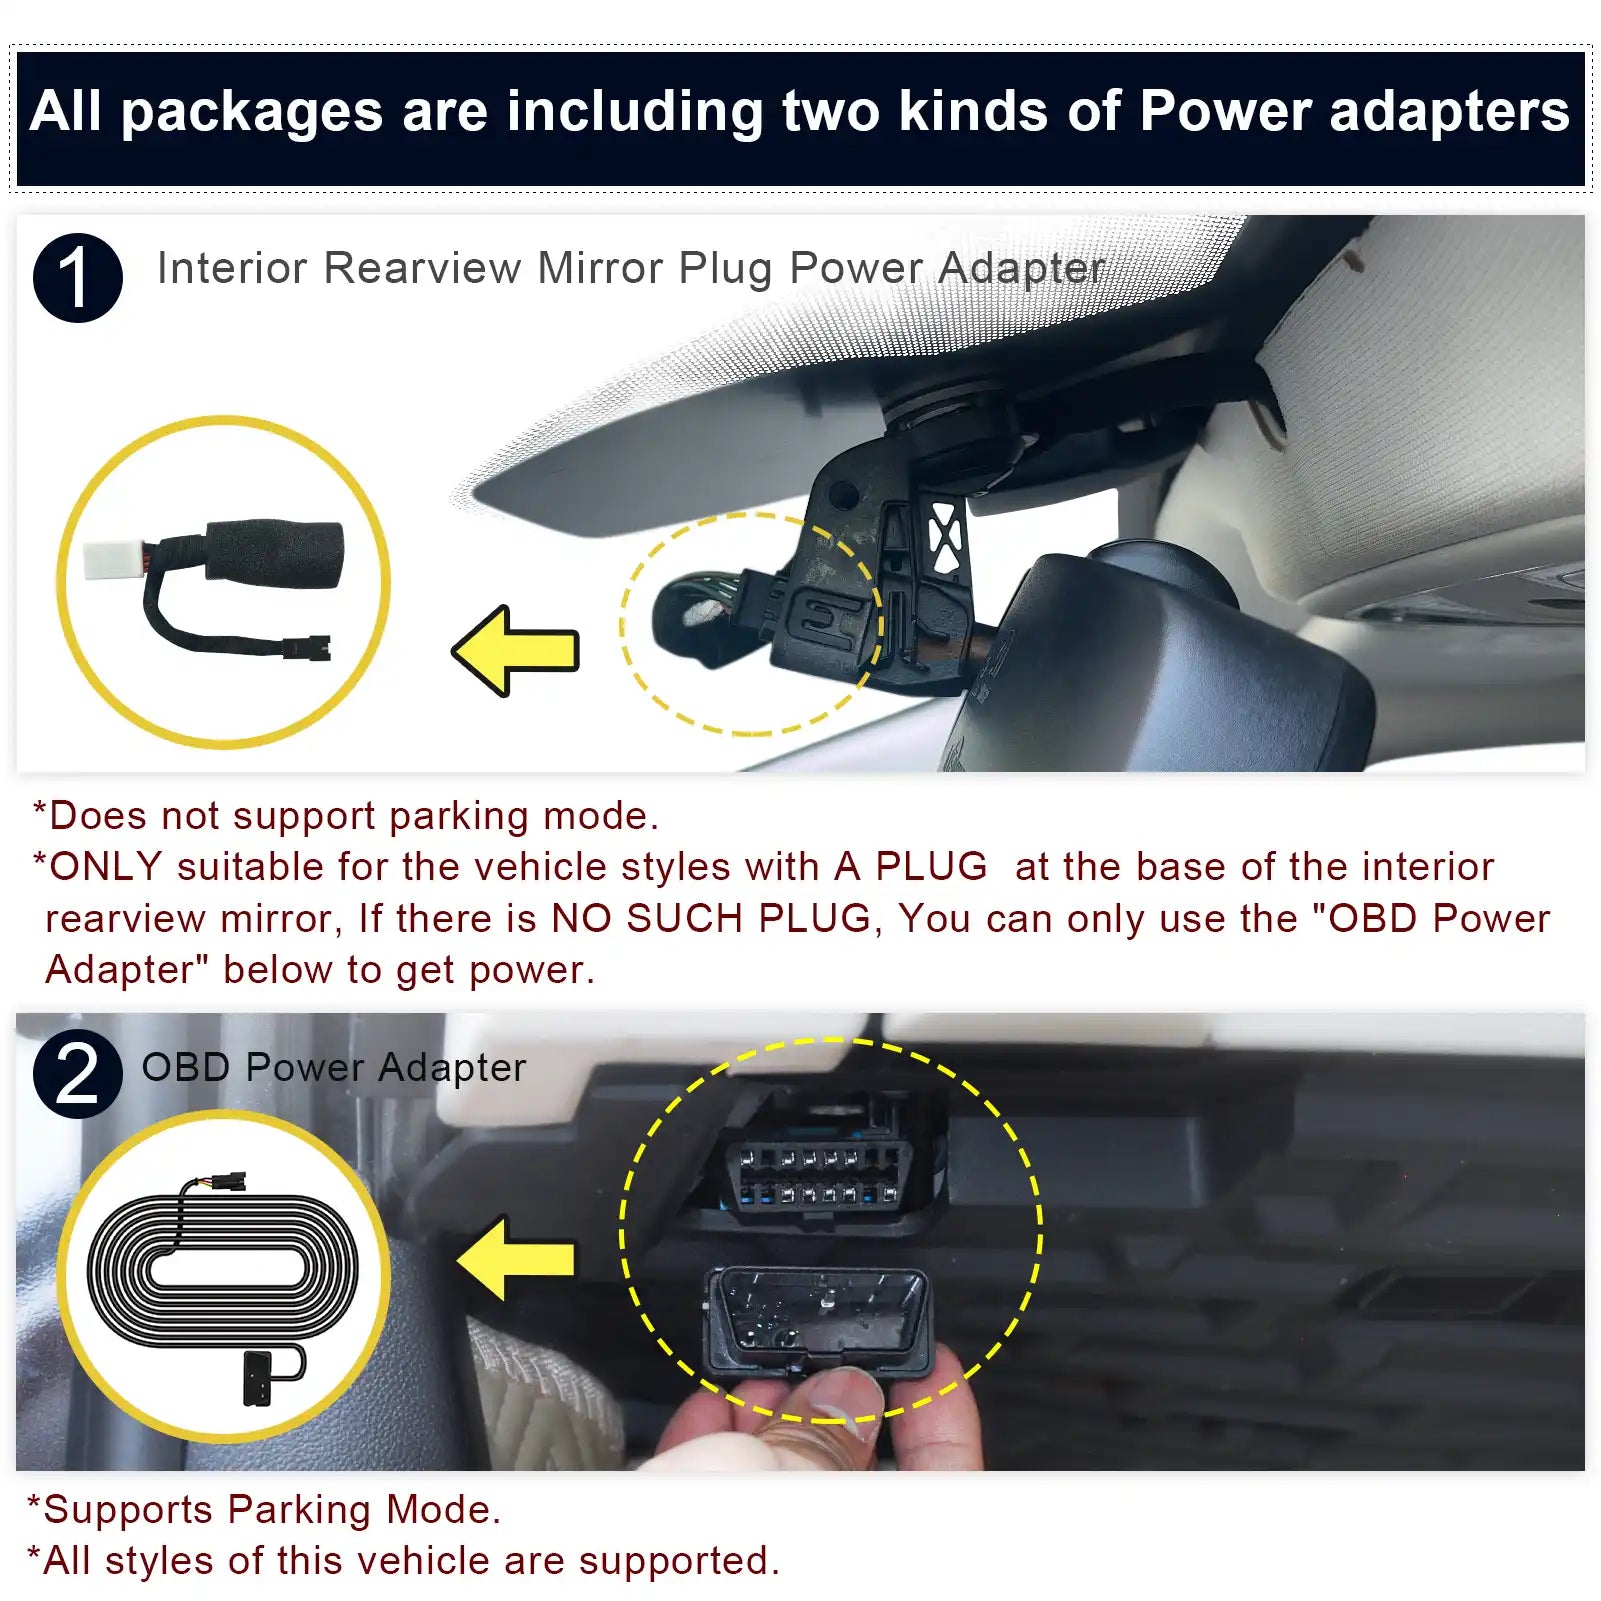 Chrysler Pacifica dash cam OBD power adapter